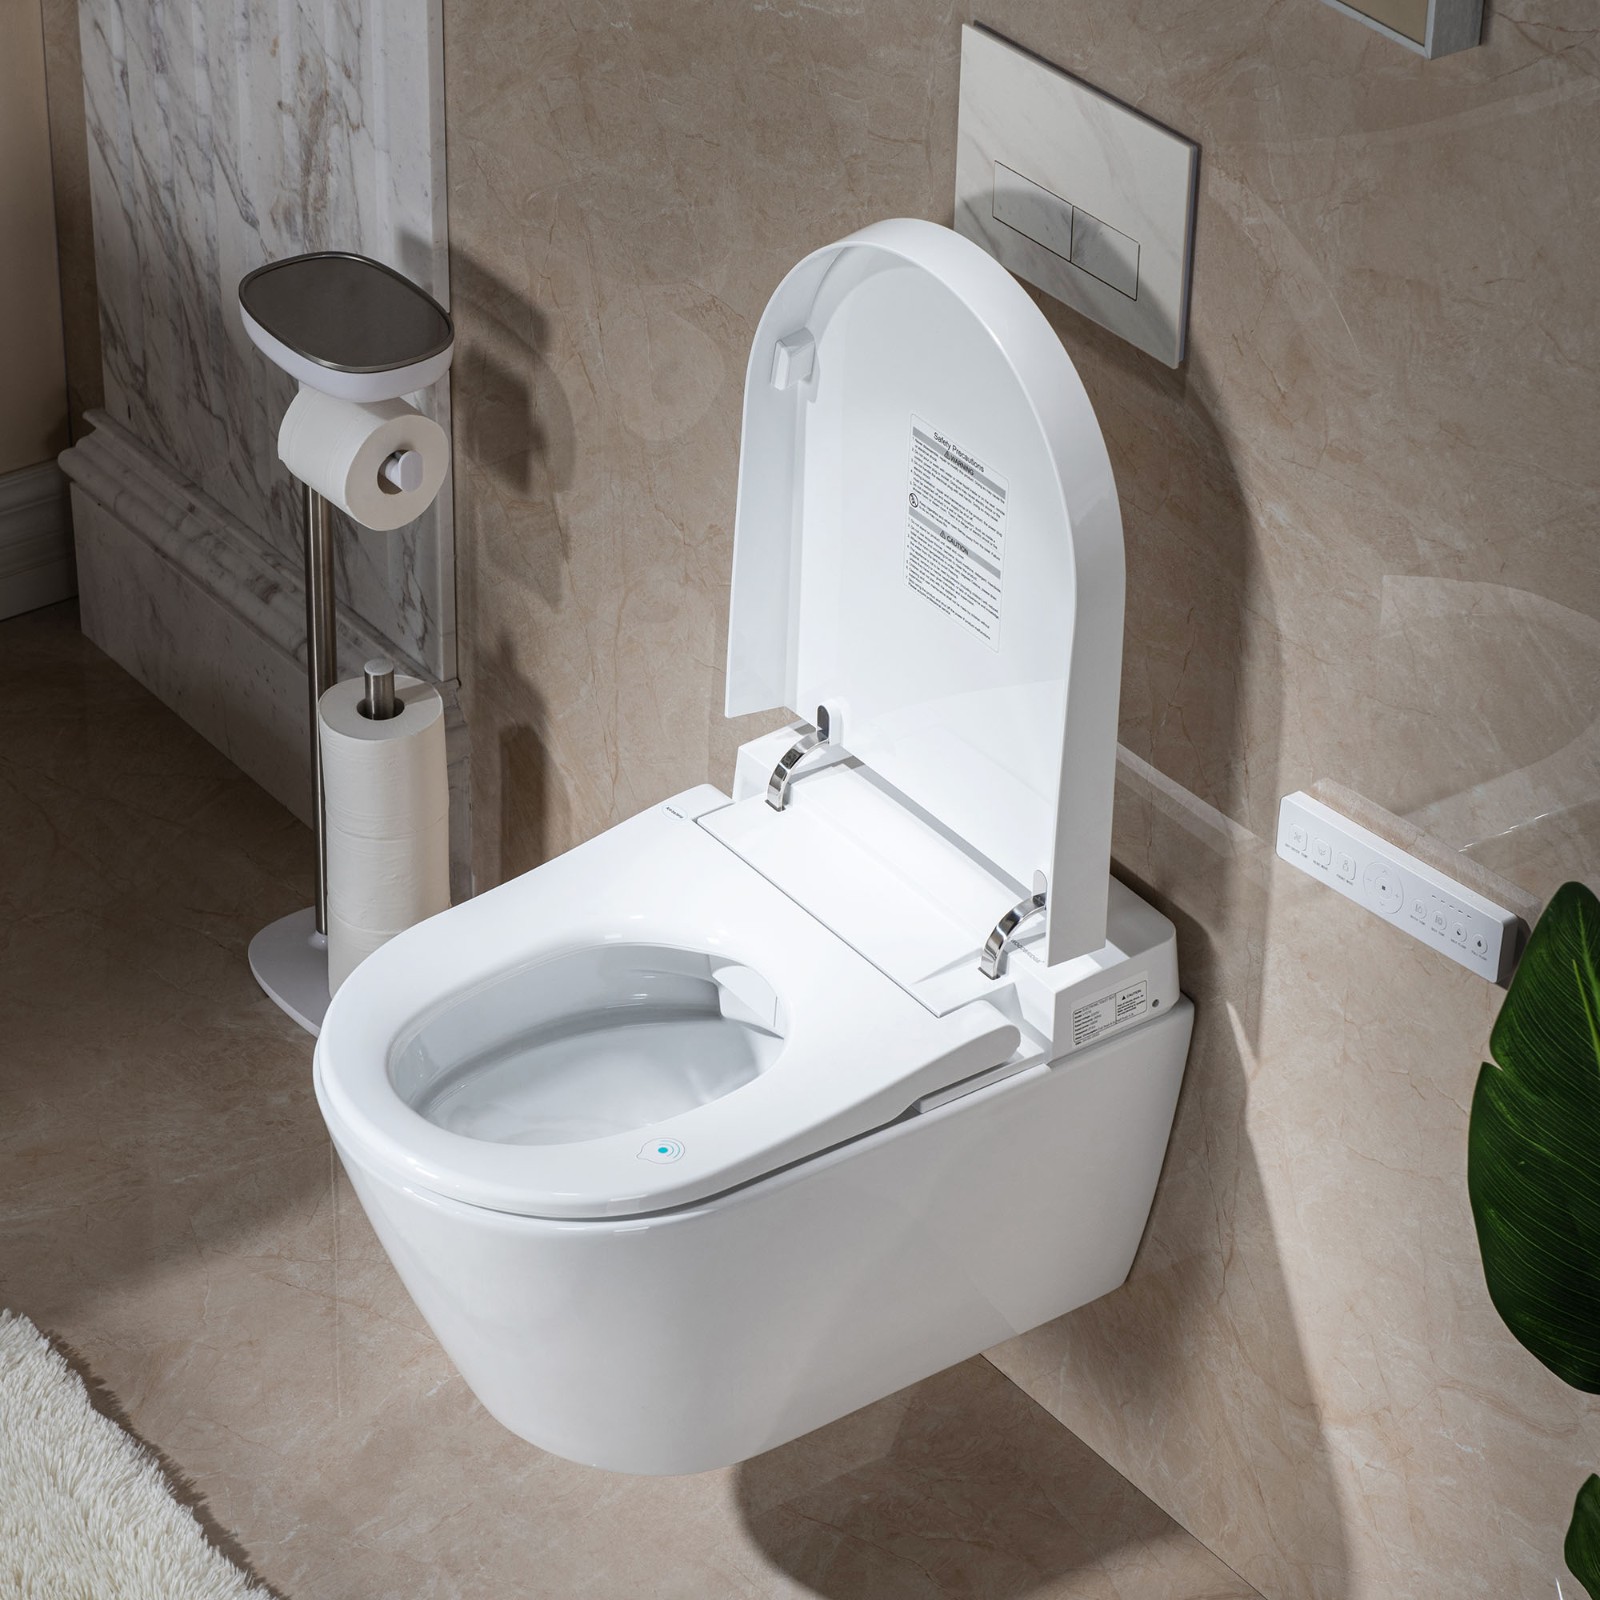  WOODBRIDGE  Intelligent Compact Elongated Dual-flush wall hung toilet with Bidet Wash Function, Heated Seat & Dryer. Matching Concealed Tank system and White Marble Stone Slim Flush Plates Included.LT611 + SWHT611+FP611-WH_547